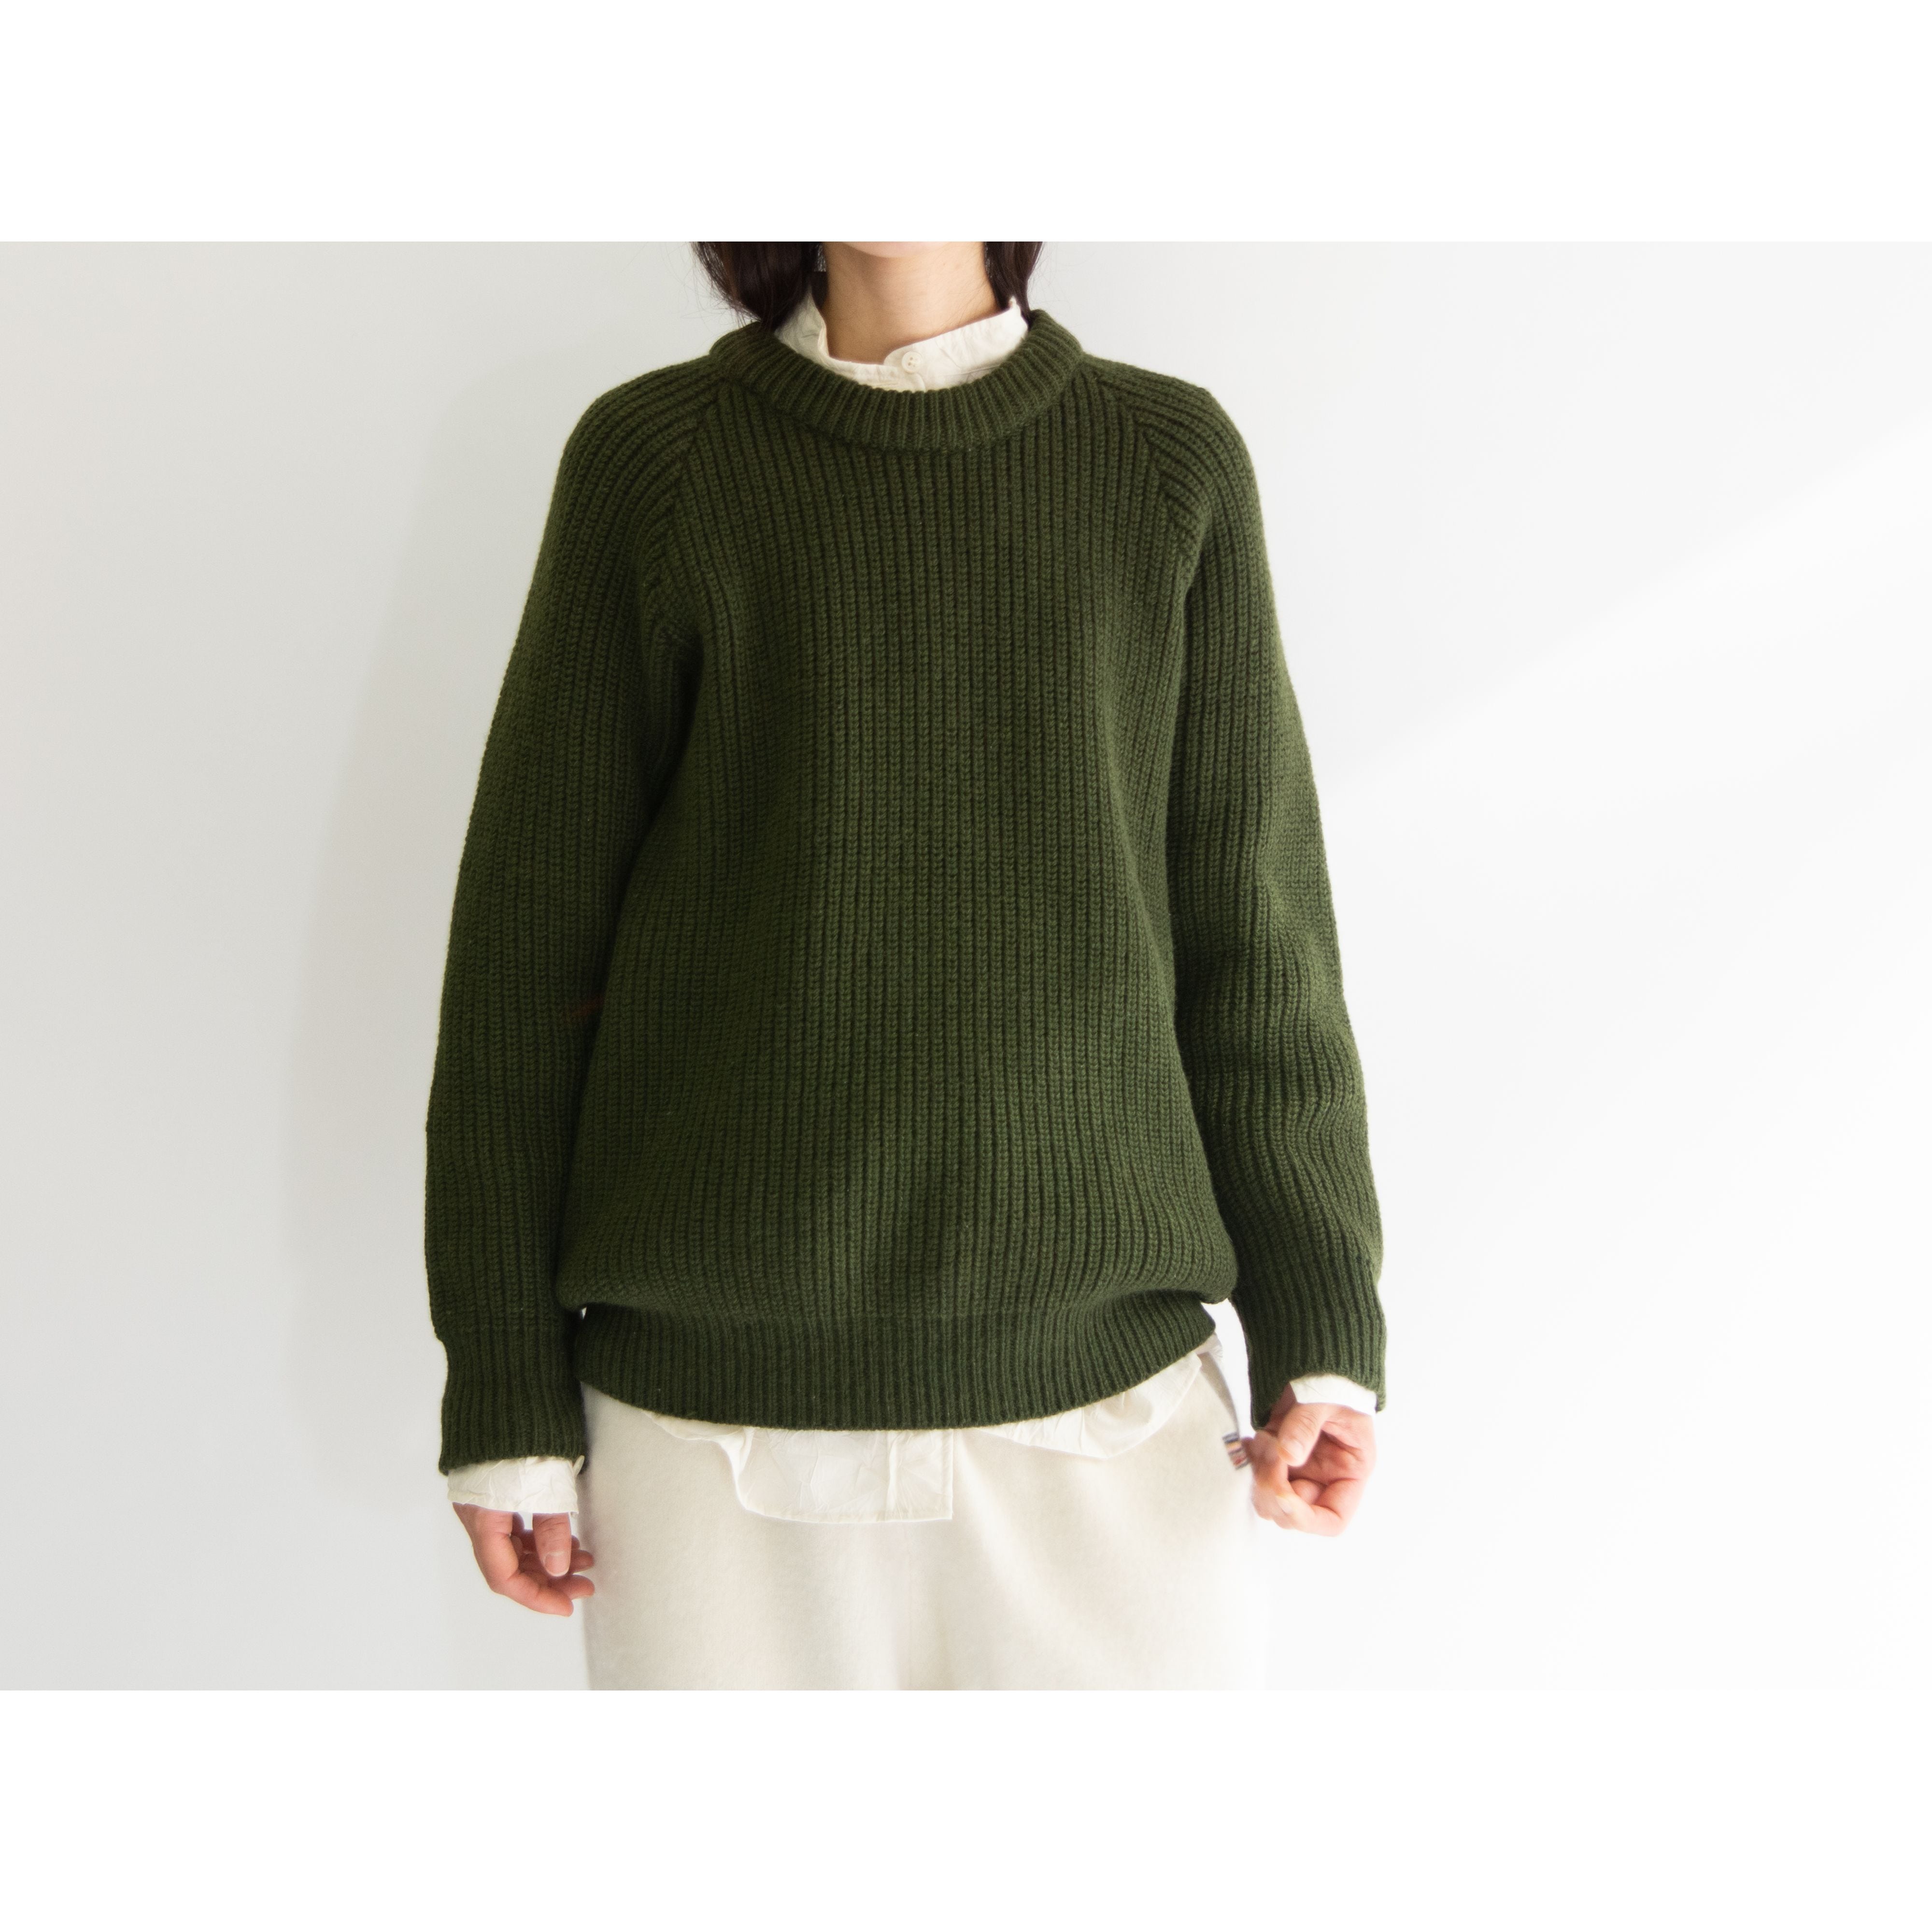 Norsewear】Made in New Zealand 100% Wool Crew Neck Sweater ...